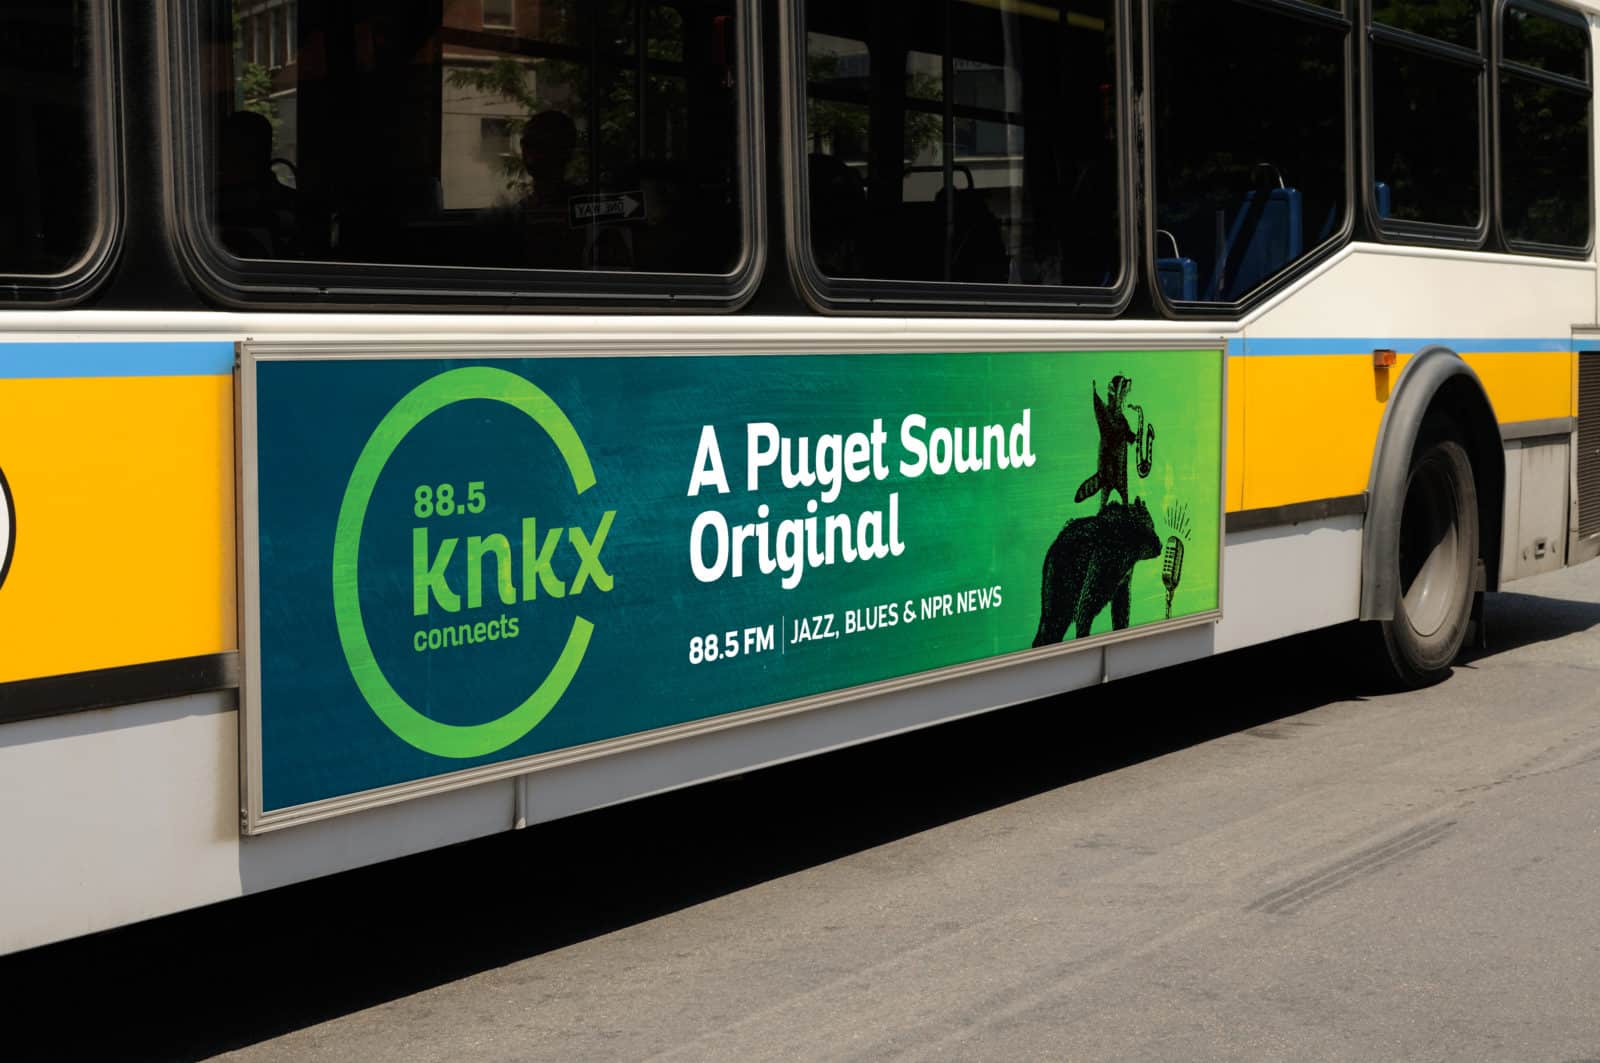 A KNKX advertisement on the side of a bus